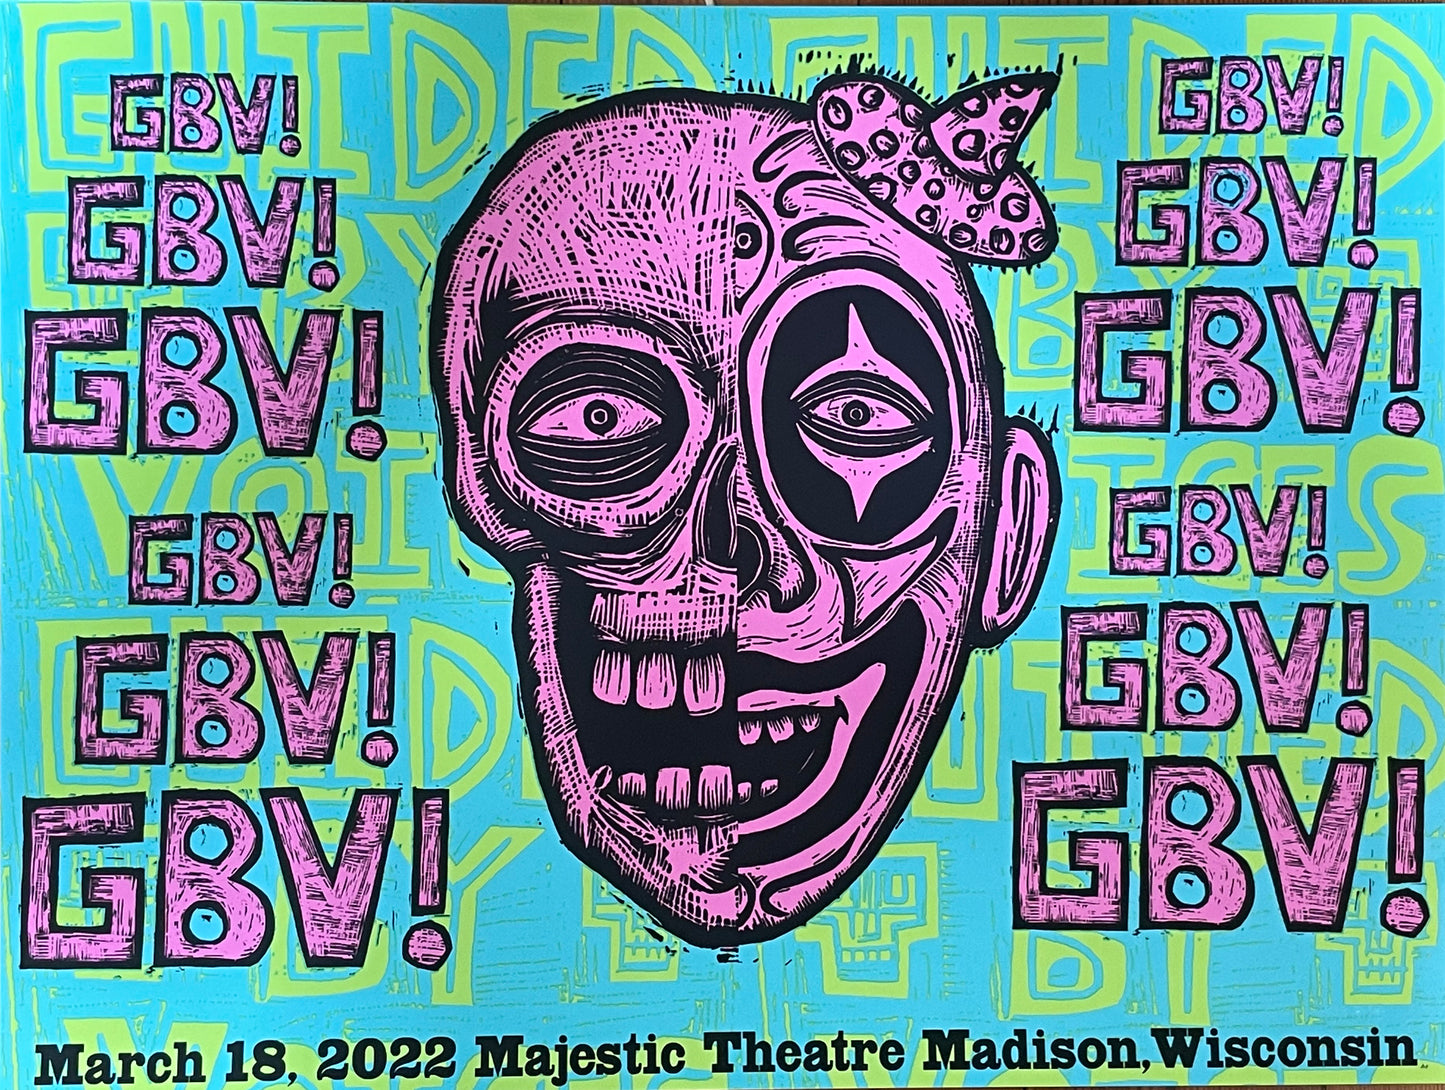 Guided By Voices Gig Poster Madison, Wi. Majestic Theatre March 18, 2022